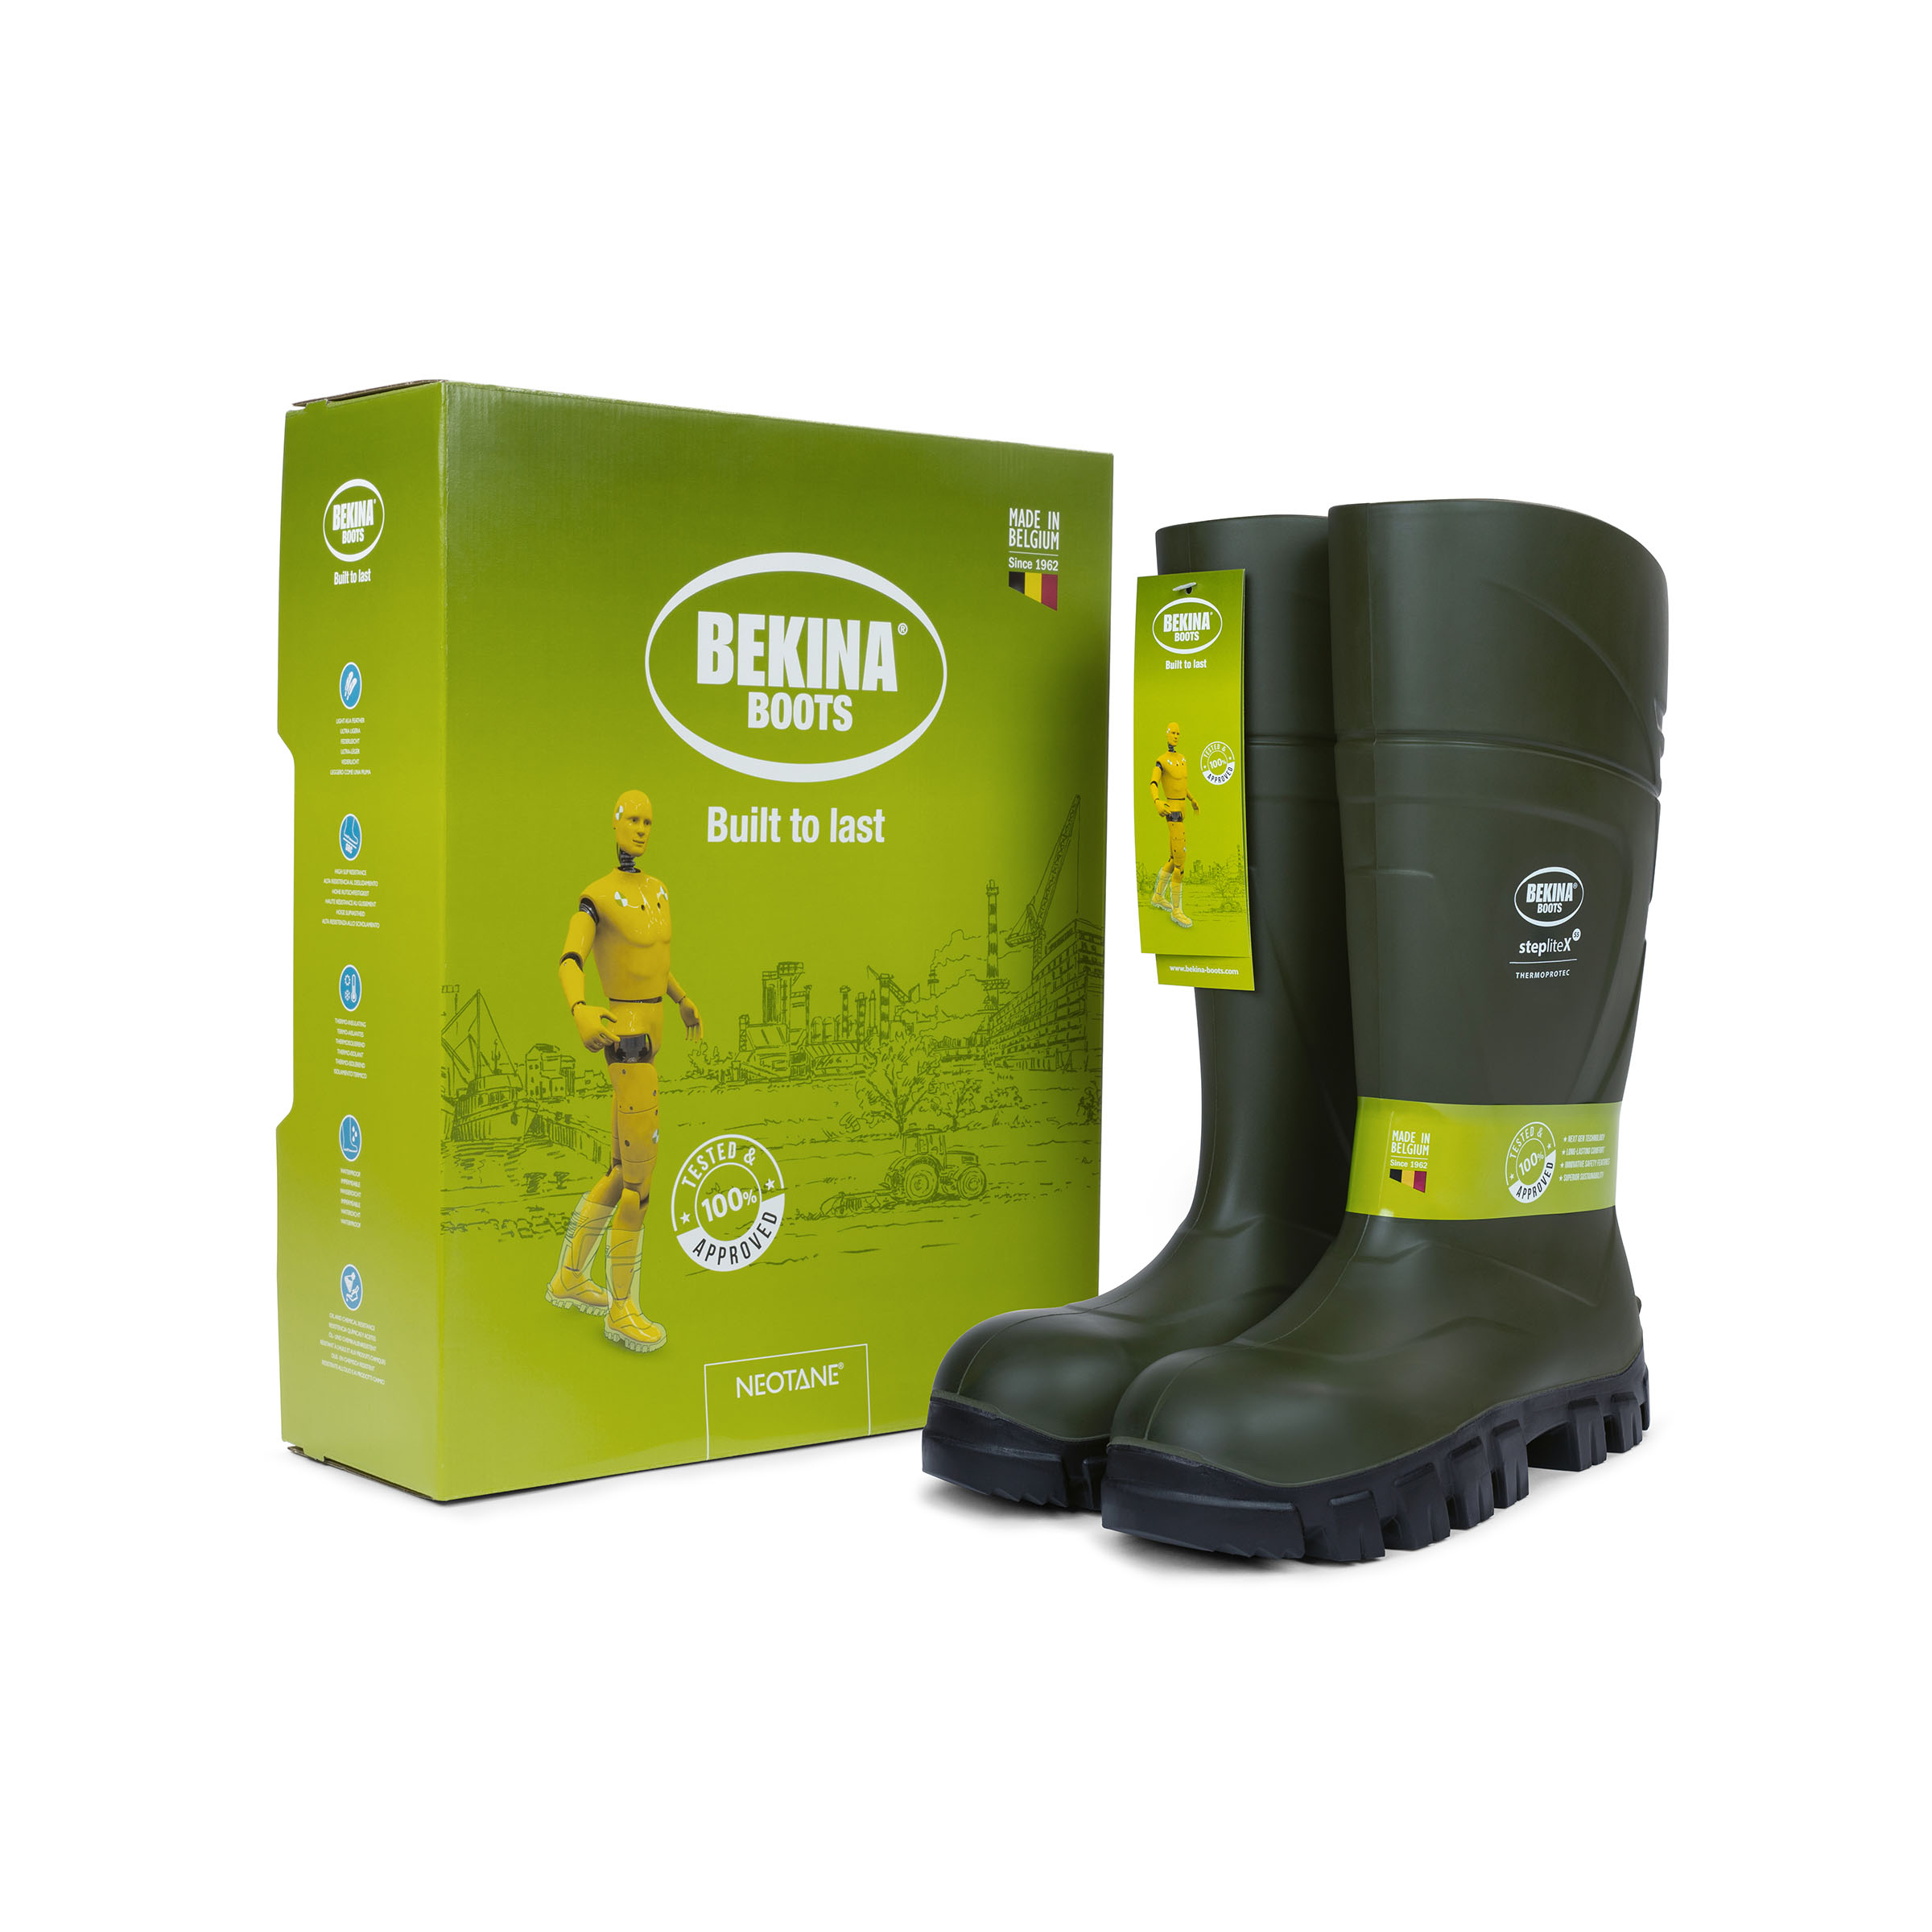 Bekina Steplite X Full Safety Wellington Boots Wellies Welly Green Insulated S5 